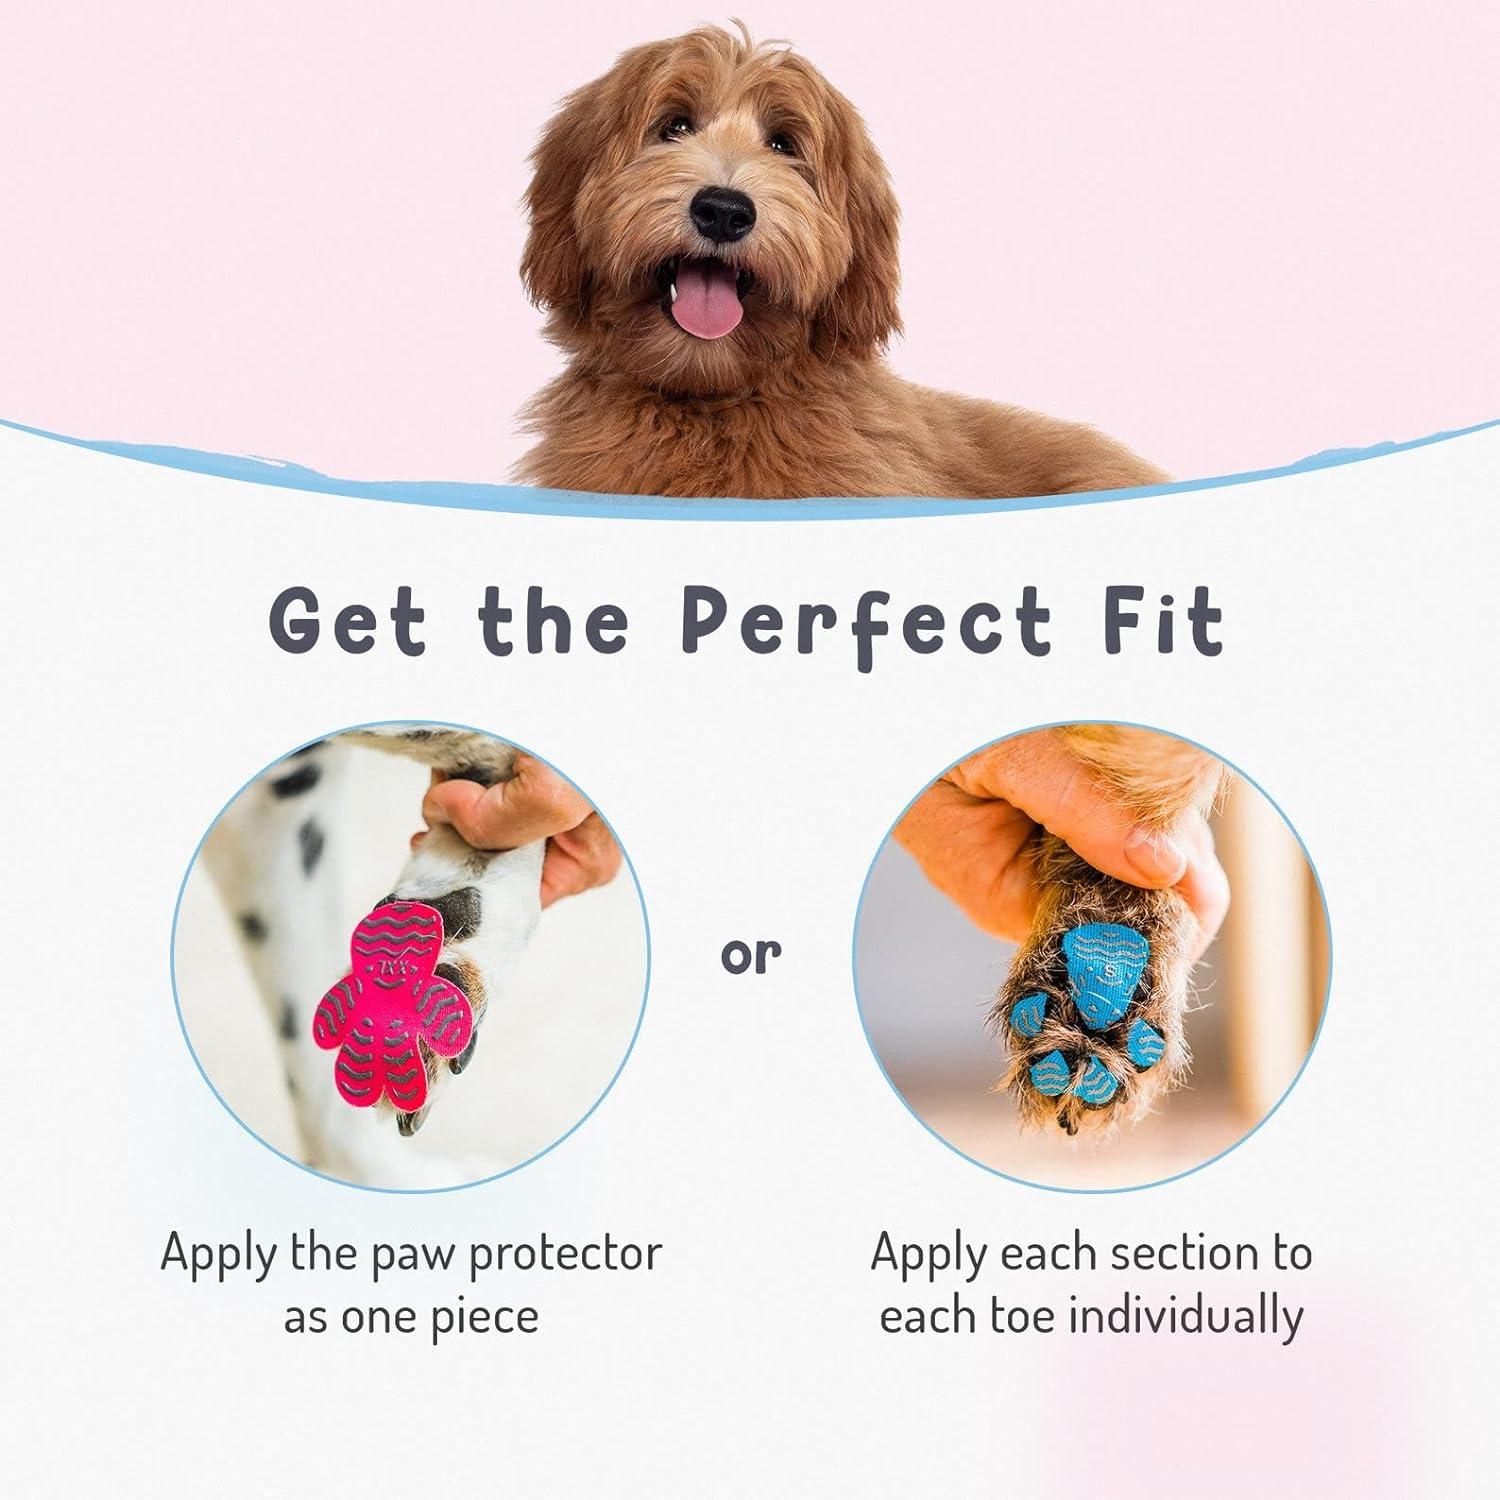 My Furry Amigo Dog Paw Grips - Paw Protectors - for Slippery Floors, Indoor and Outdoor Protection for Safer Paws